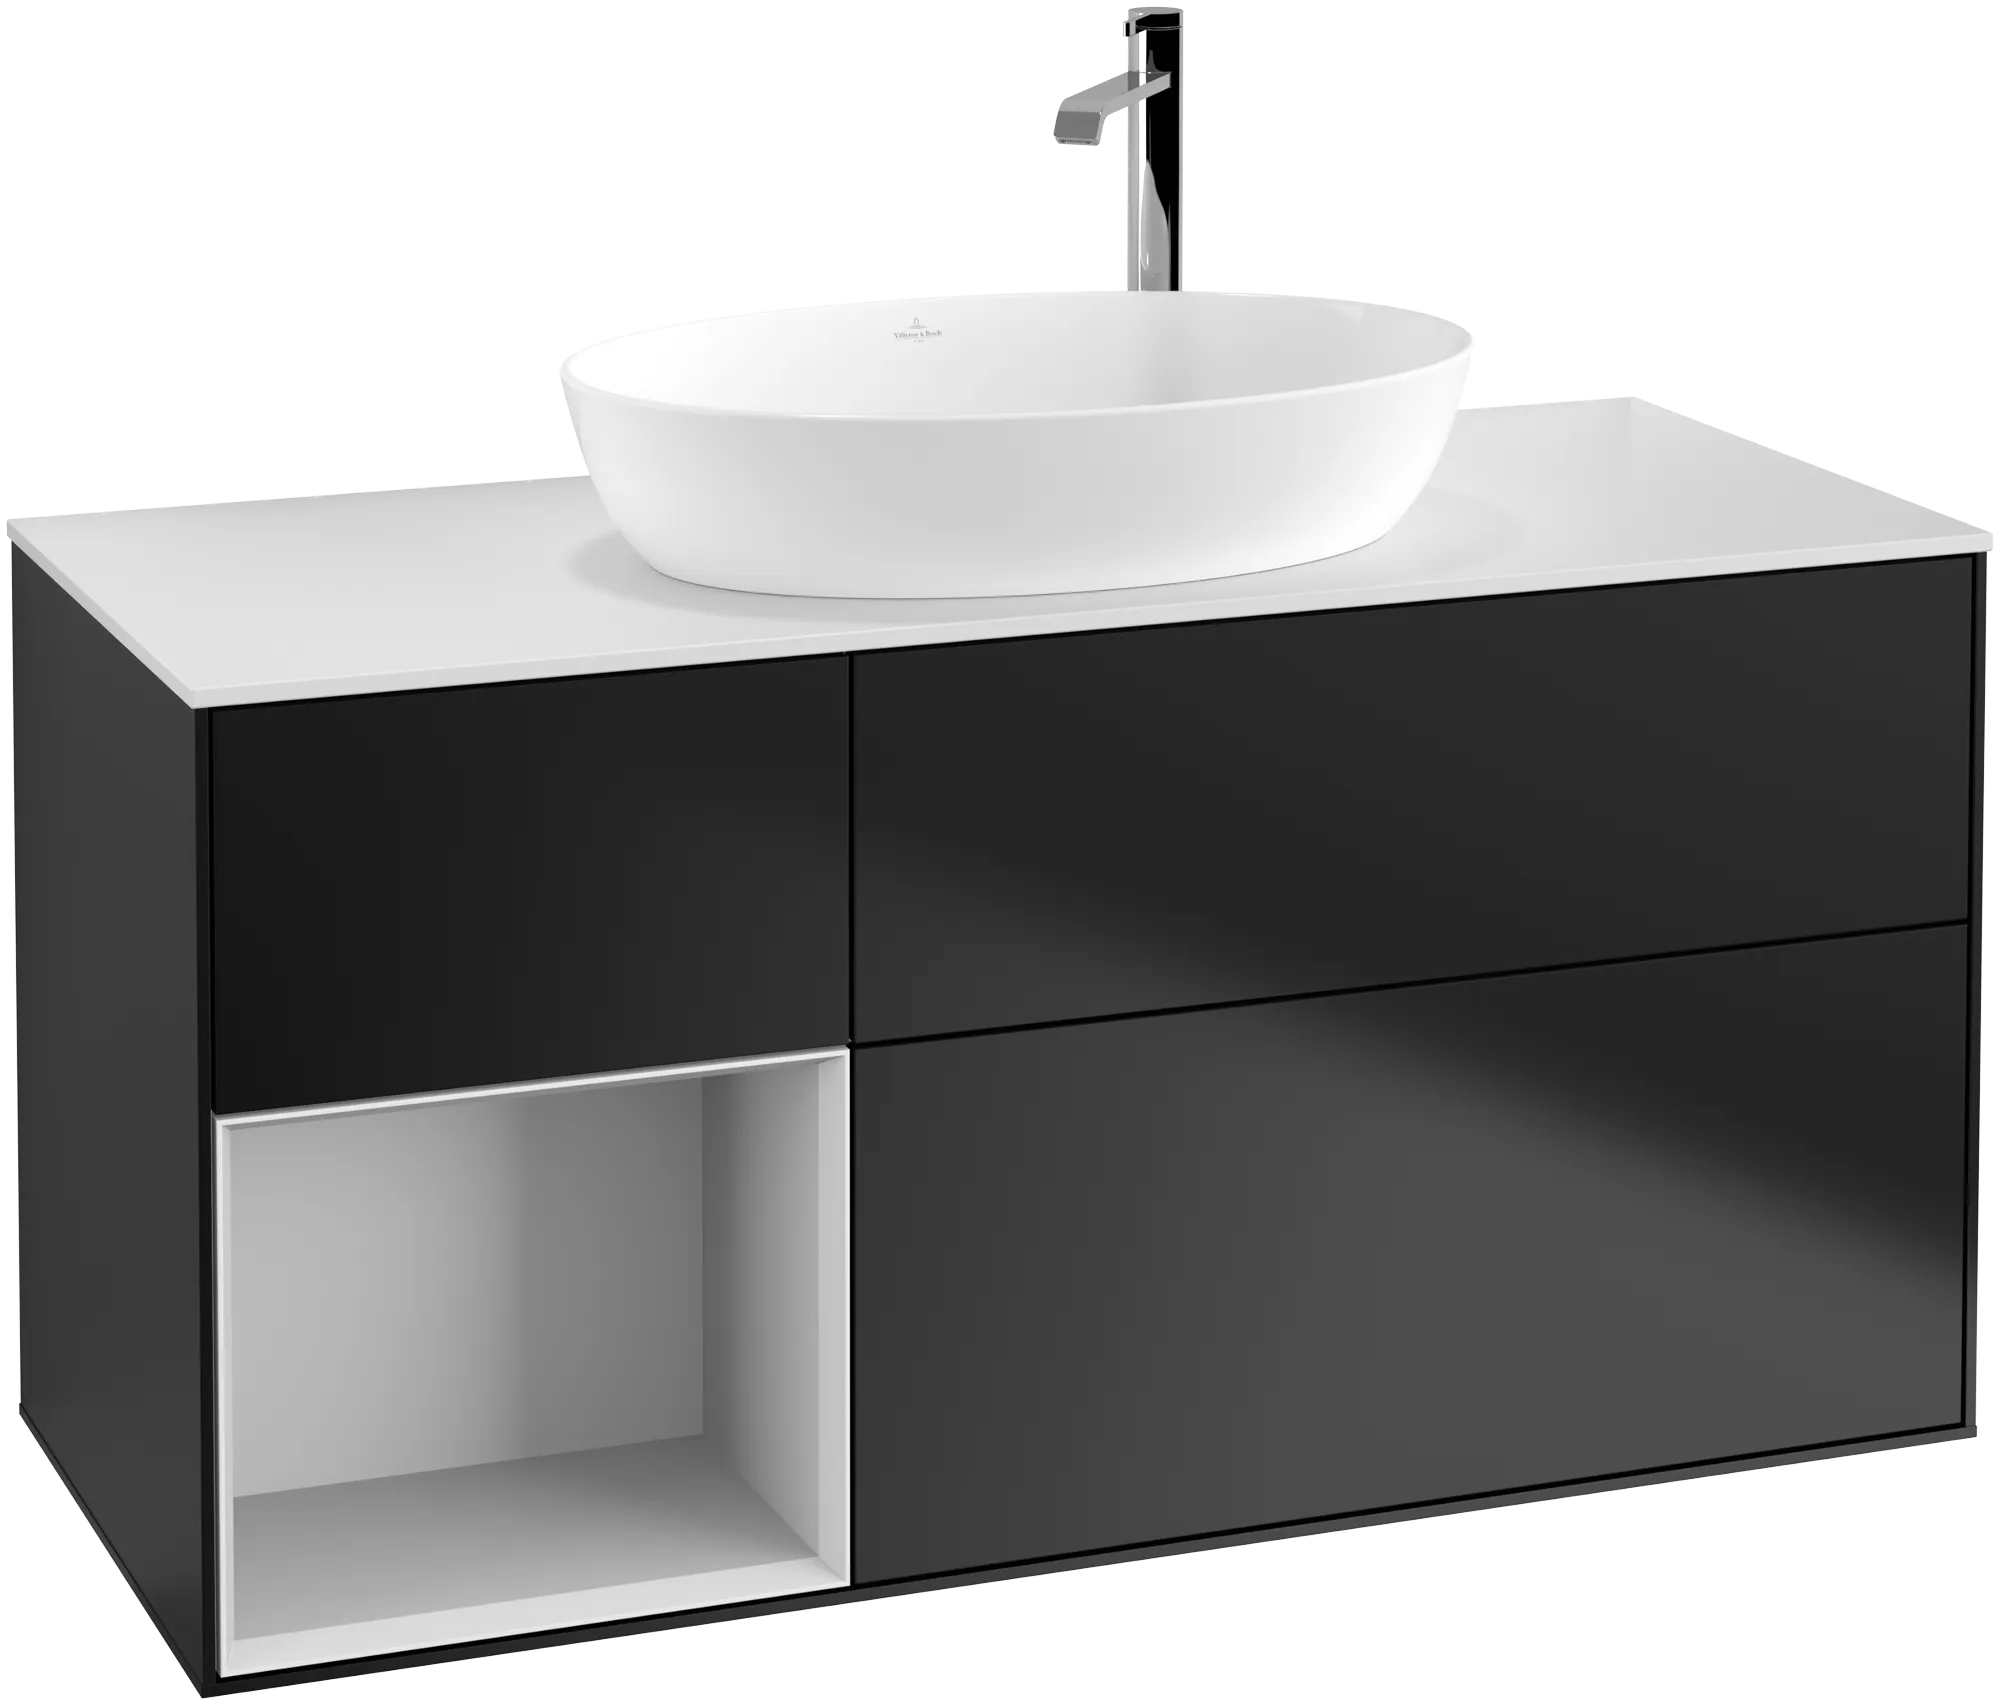 VILLEROY BOCH Finion Vanity unit, with lighting, 3 pull-out compartments, 1200 x 603 x 501 mm, Black Matt Lacquer / White Matt Lacquer / Glass White Matt #G941MTPD resmi